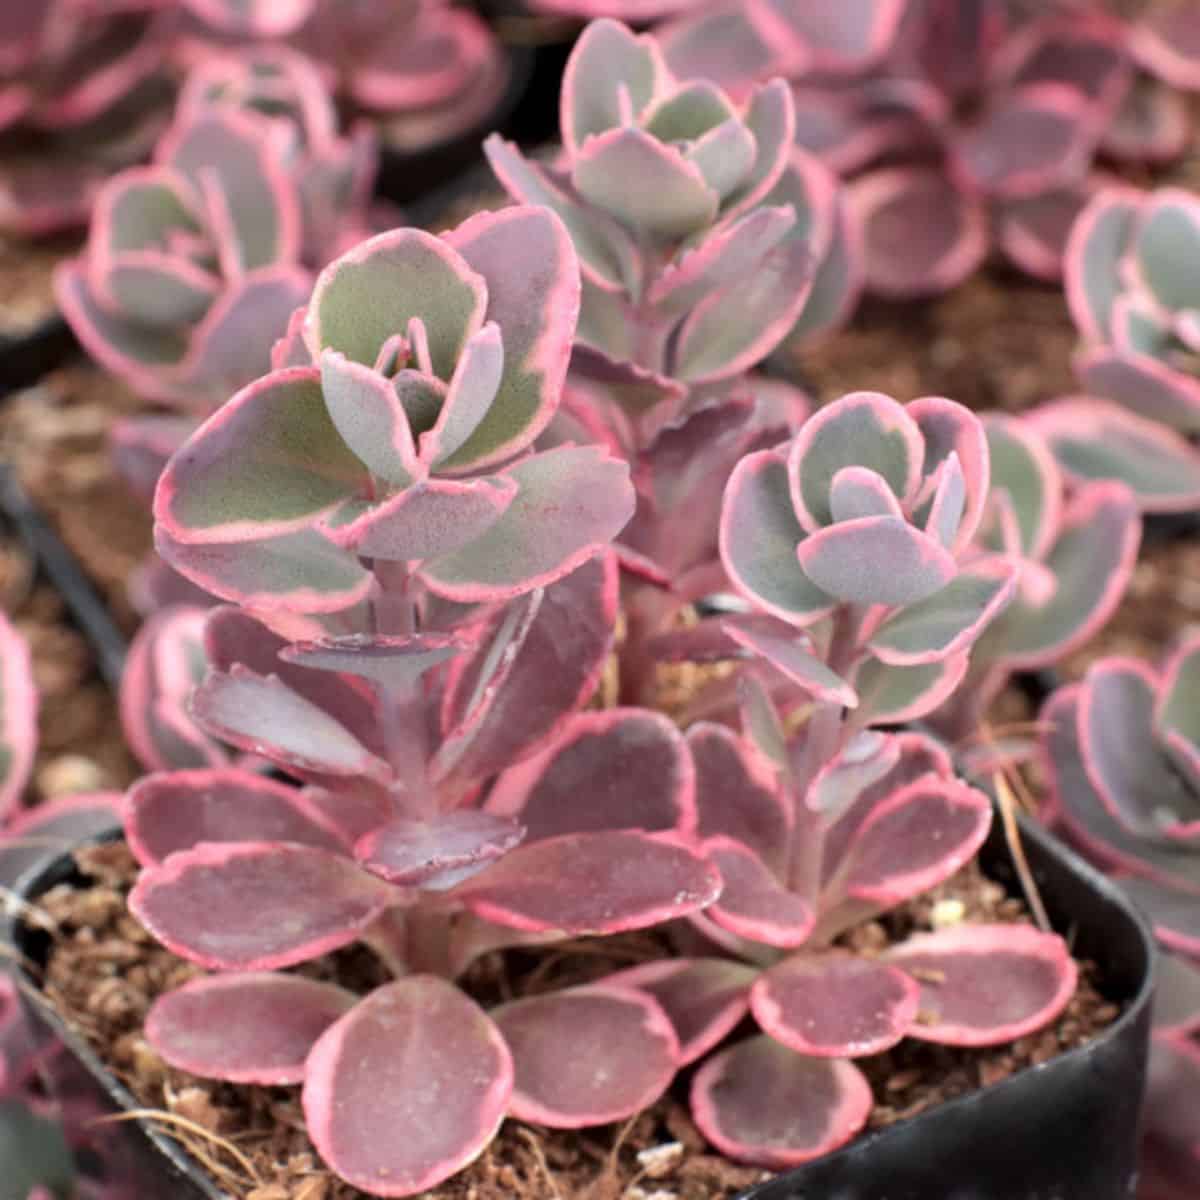 Sedum Sunsparklers with beautiful pink foliage grows in a plastic pot.